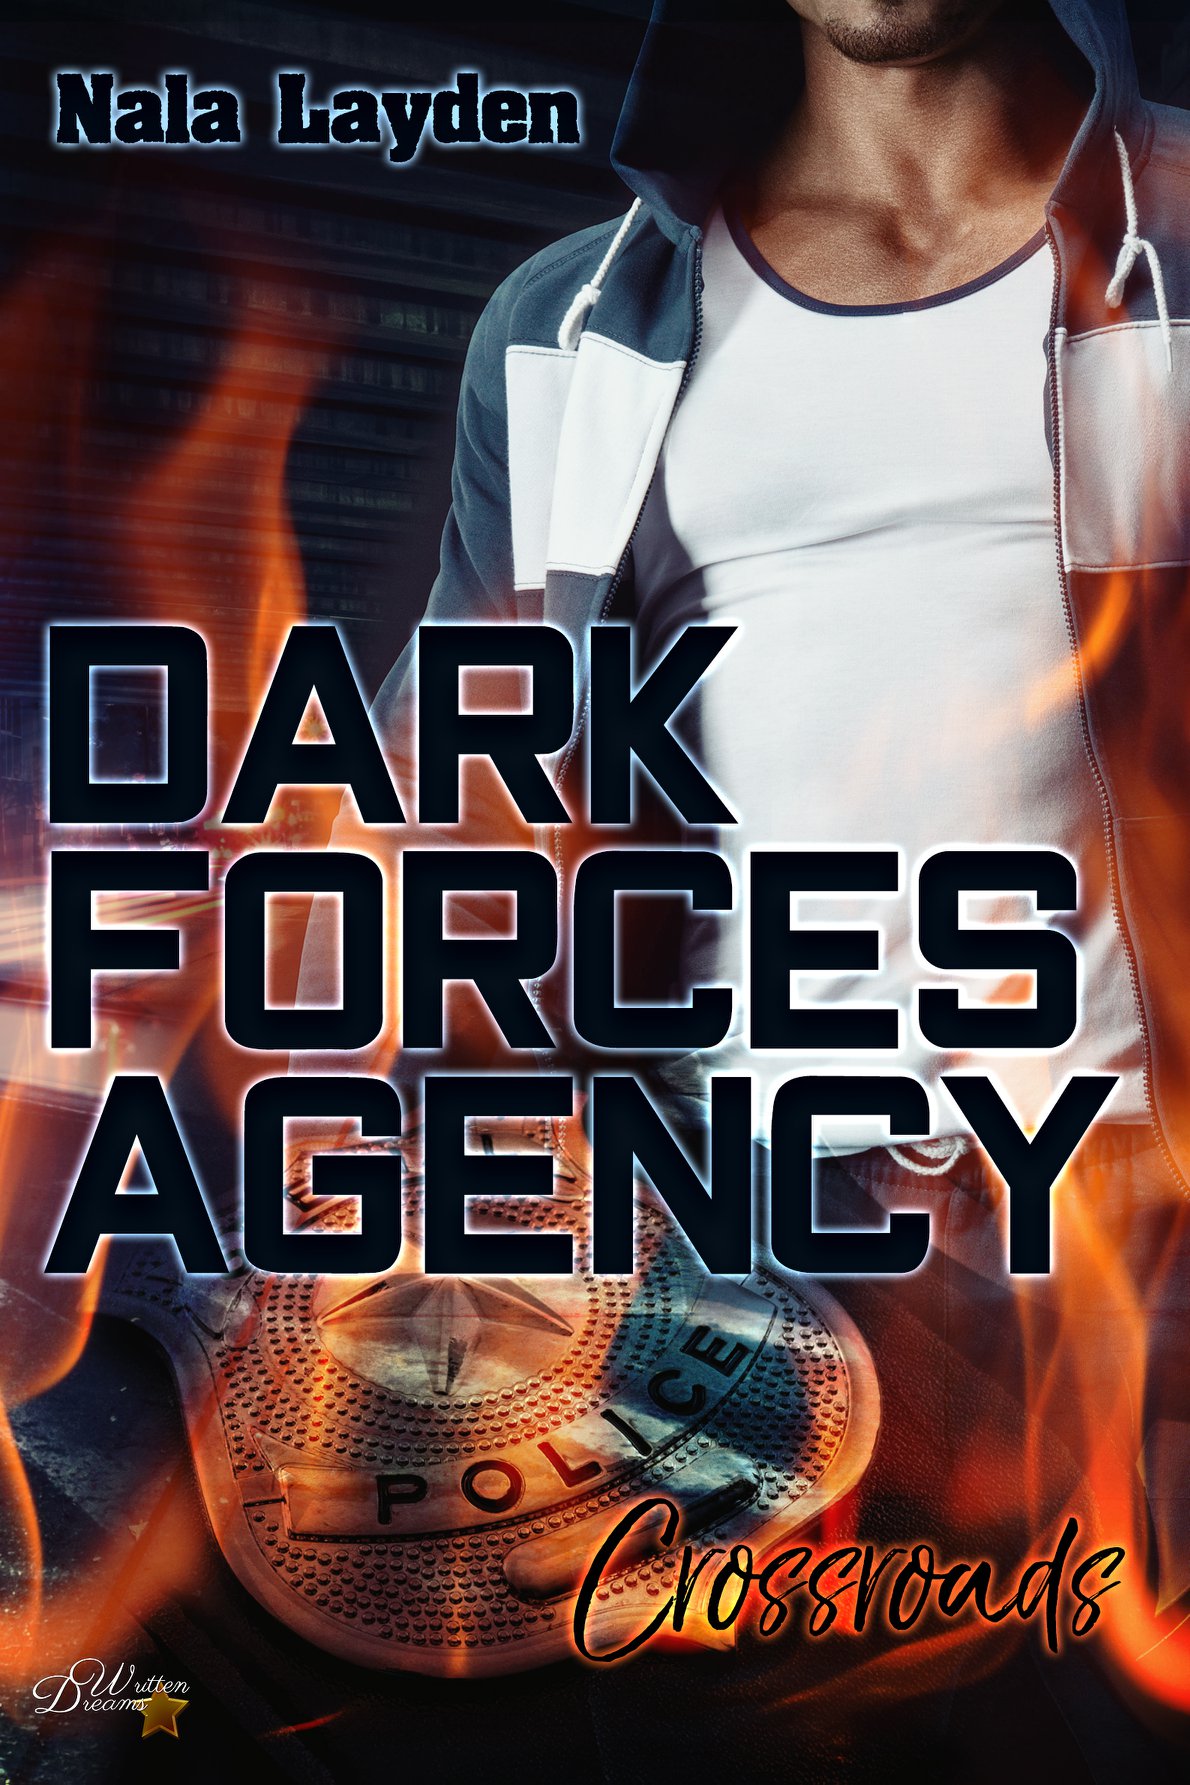 You are currently viewing Dark Forces Agency – Nala Layden